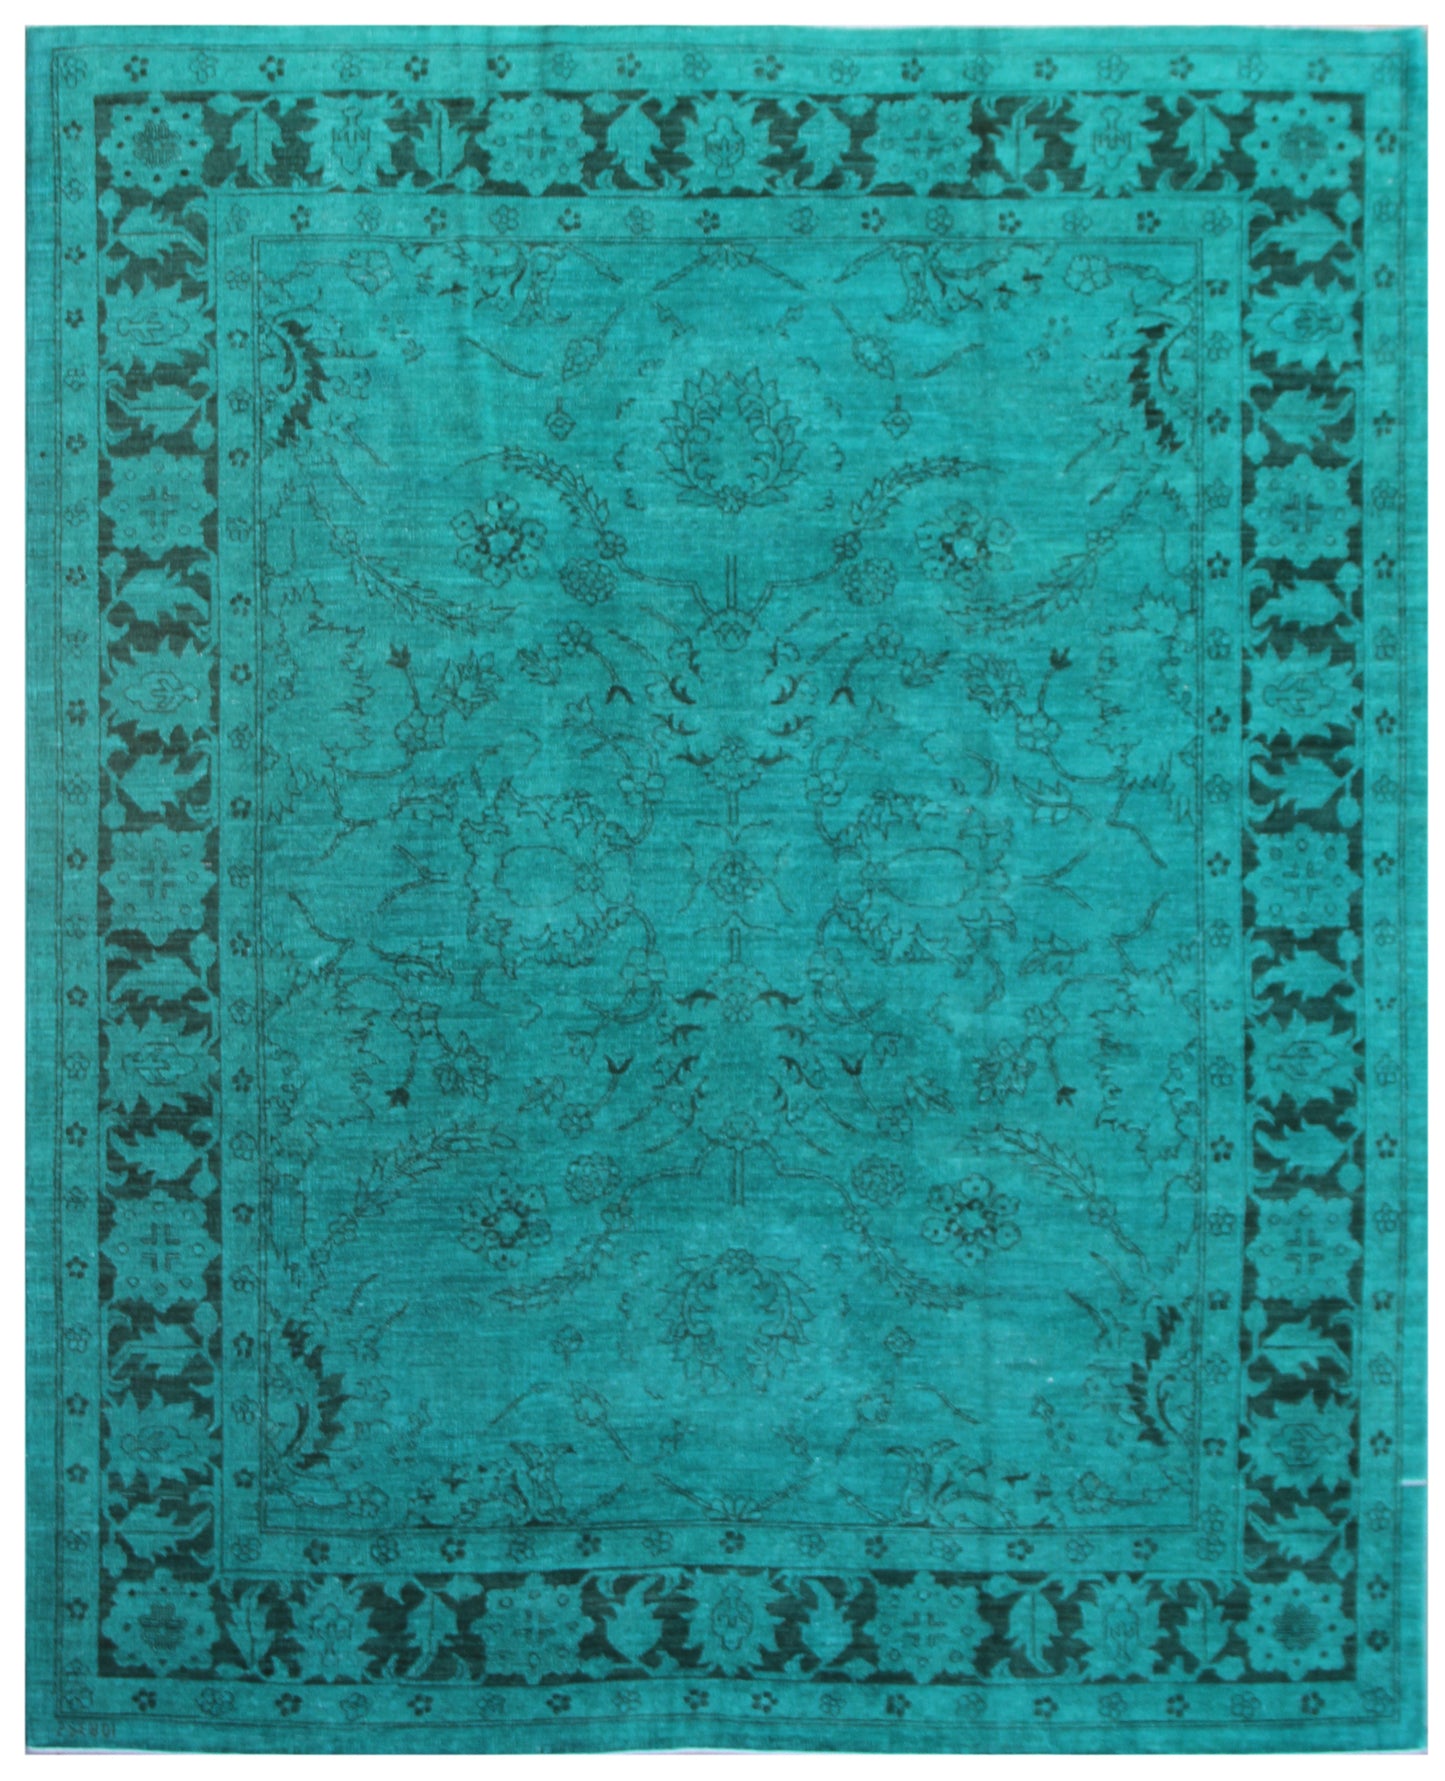 8'x10' Green Turquoise Blue Agra Ariana Over-dye Area Rug